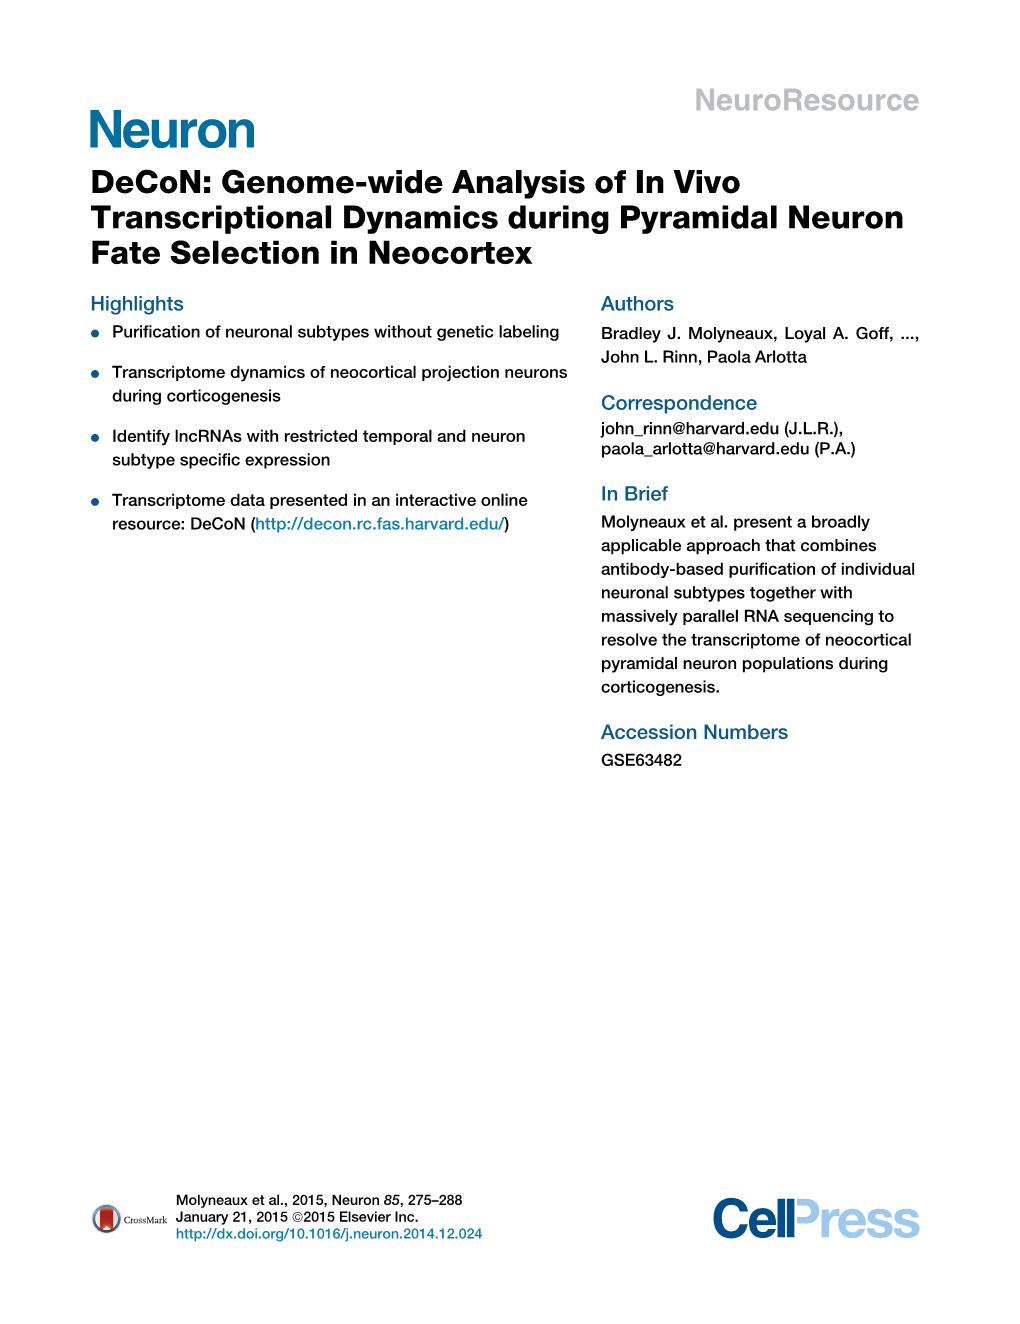 Decon: Genome-Wide Analysis of in Vivo Transcriptional Dynamics During Pyramidal Neuron Fate Selection in Neocortex